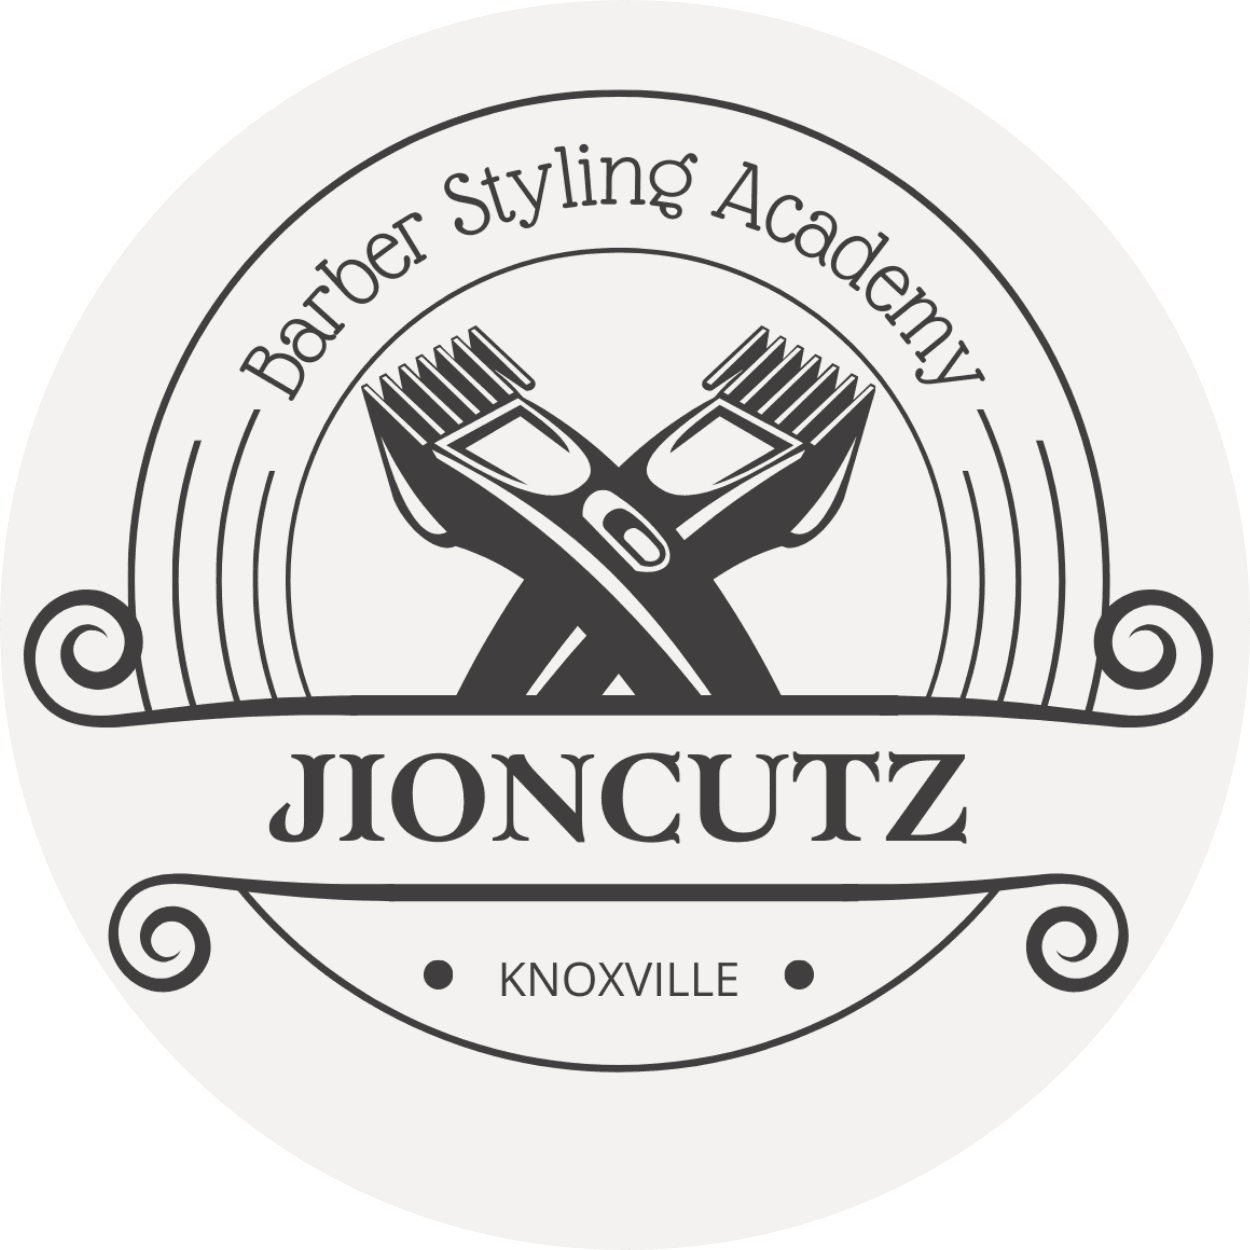 Jioncutz Barber Styling Academy